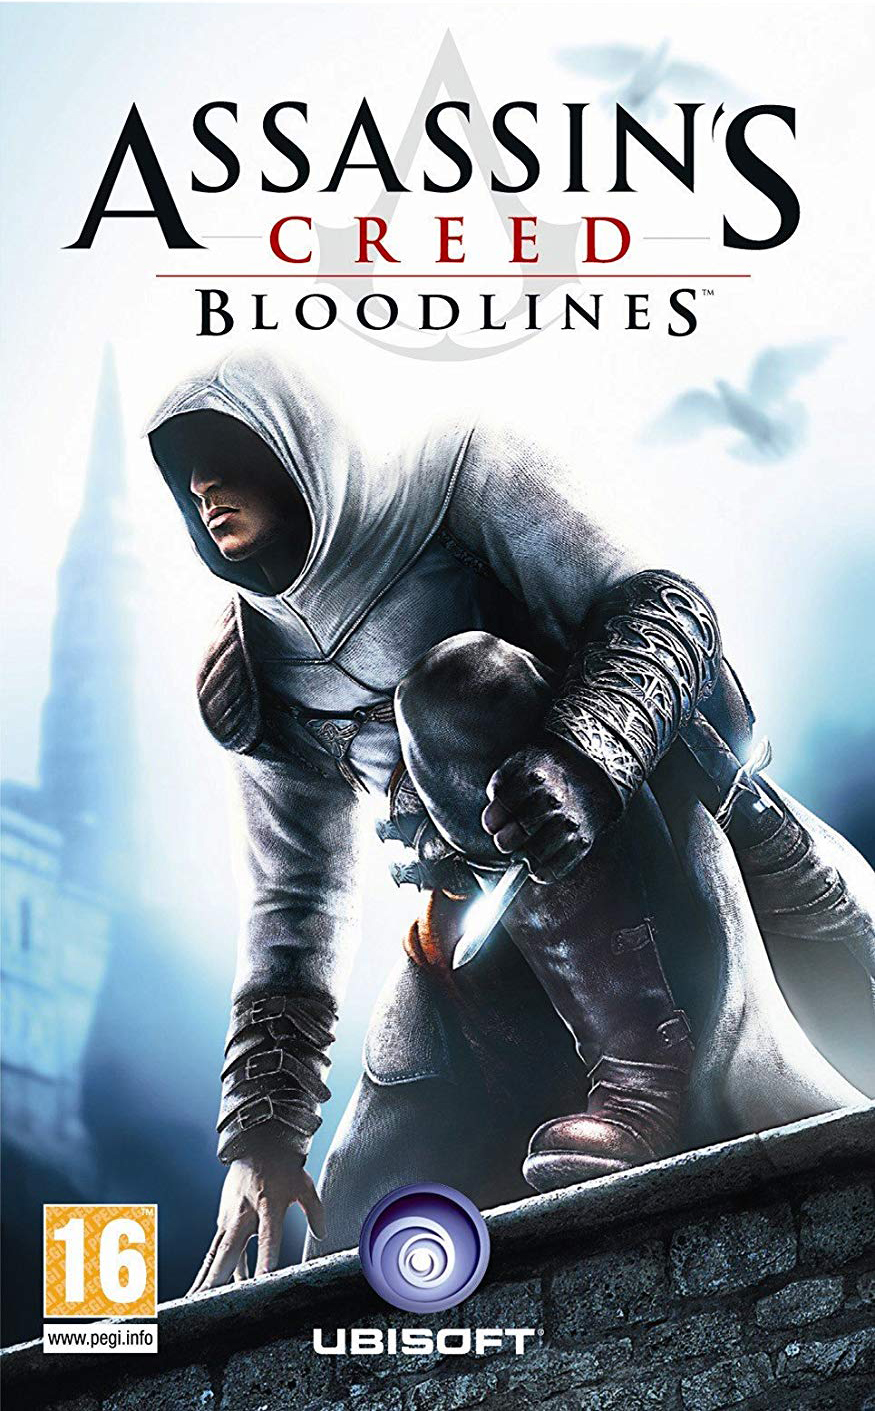 where are the locations of silver and gold coins in assassins creed bloodlines for the psp